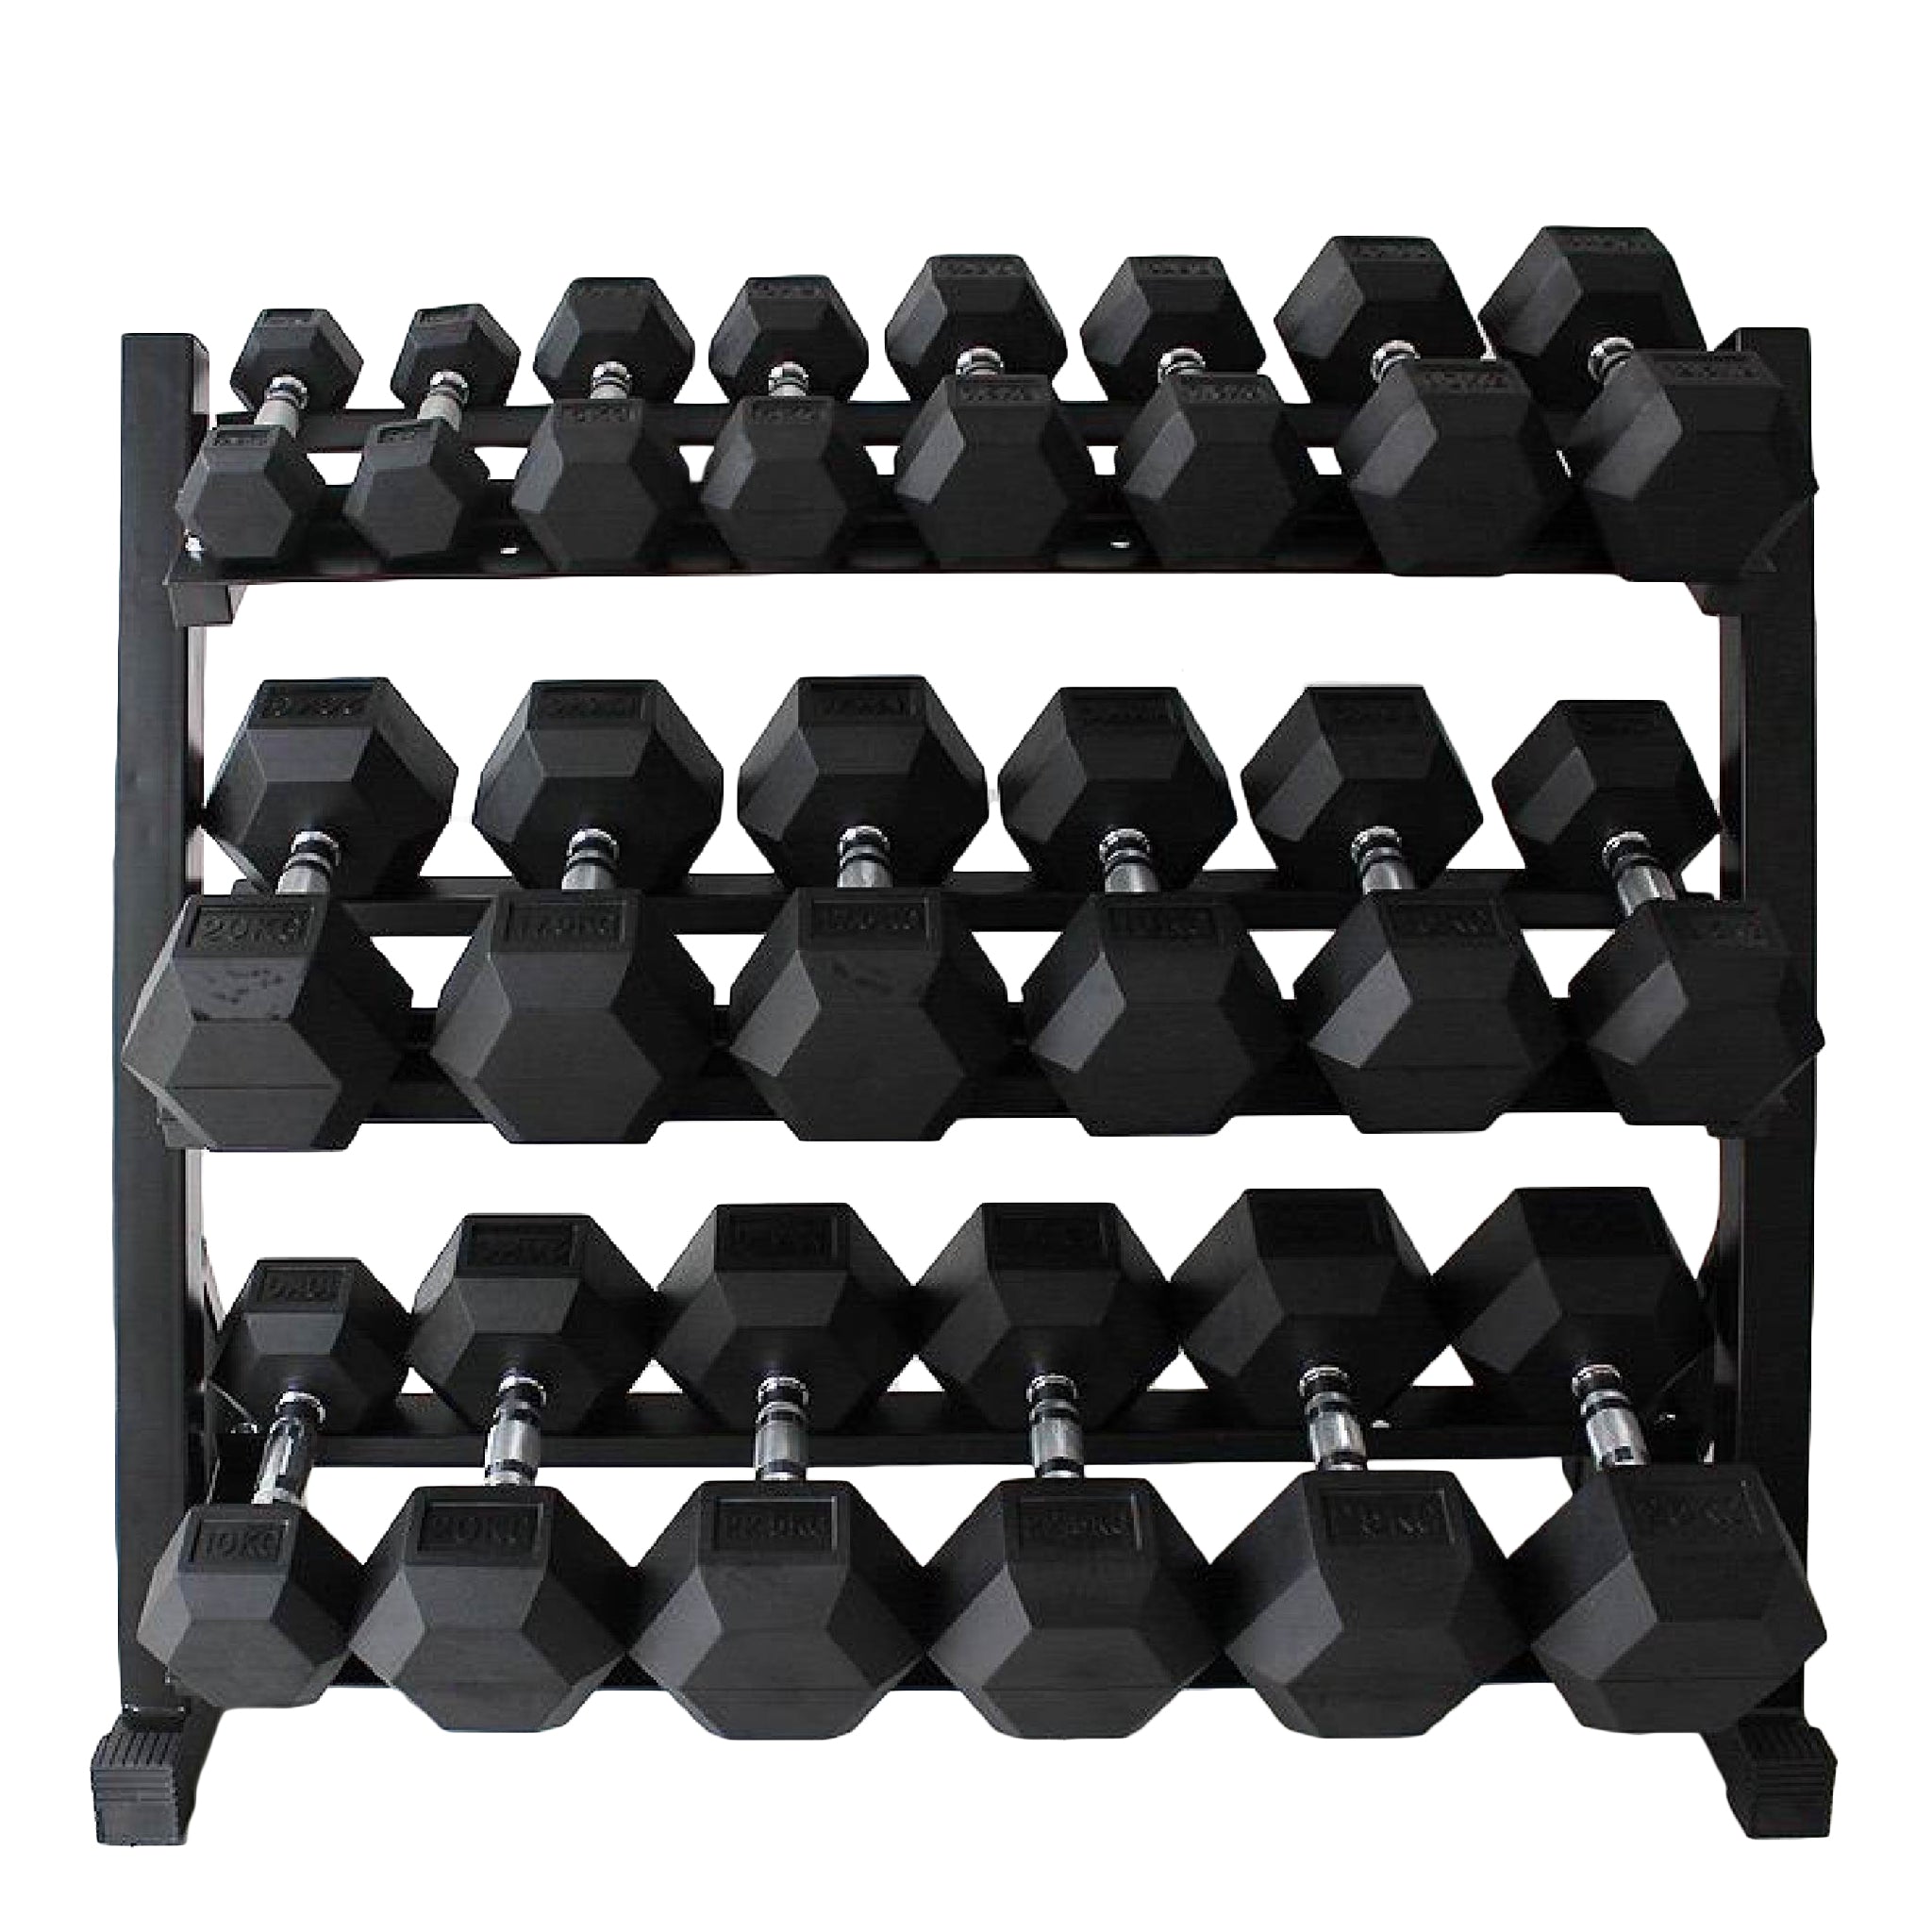 1-50kg Rubber Hexagonal Dumbbell Set With Two of 3-Tiers Dumbbell Rack - iworkout.com.au